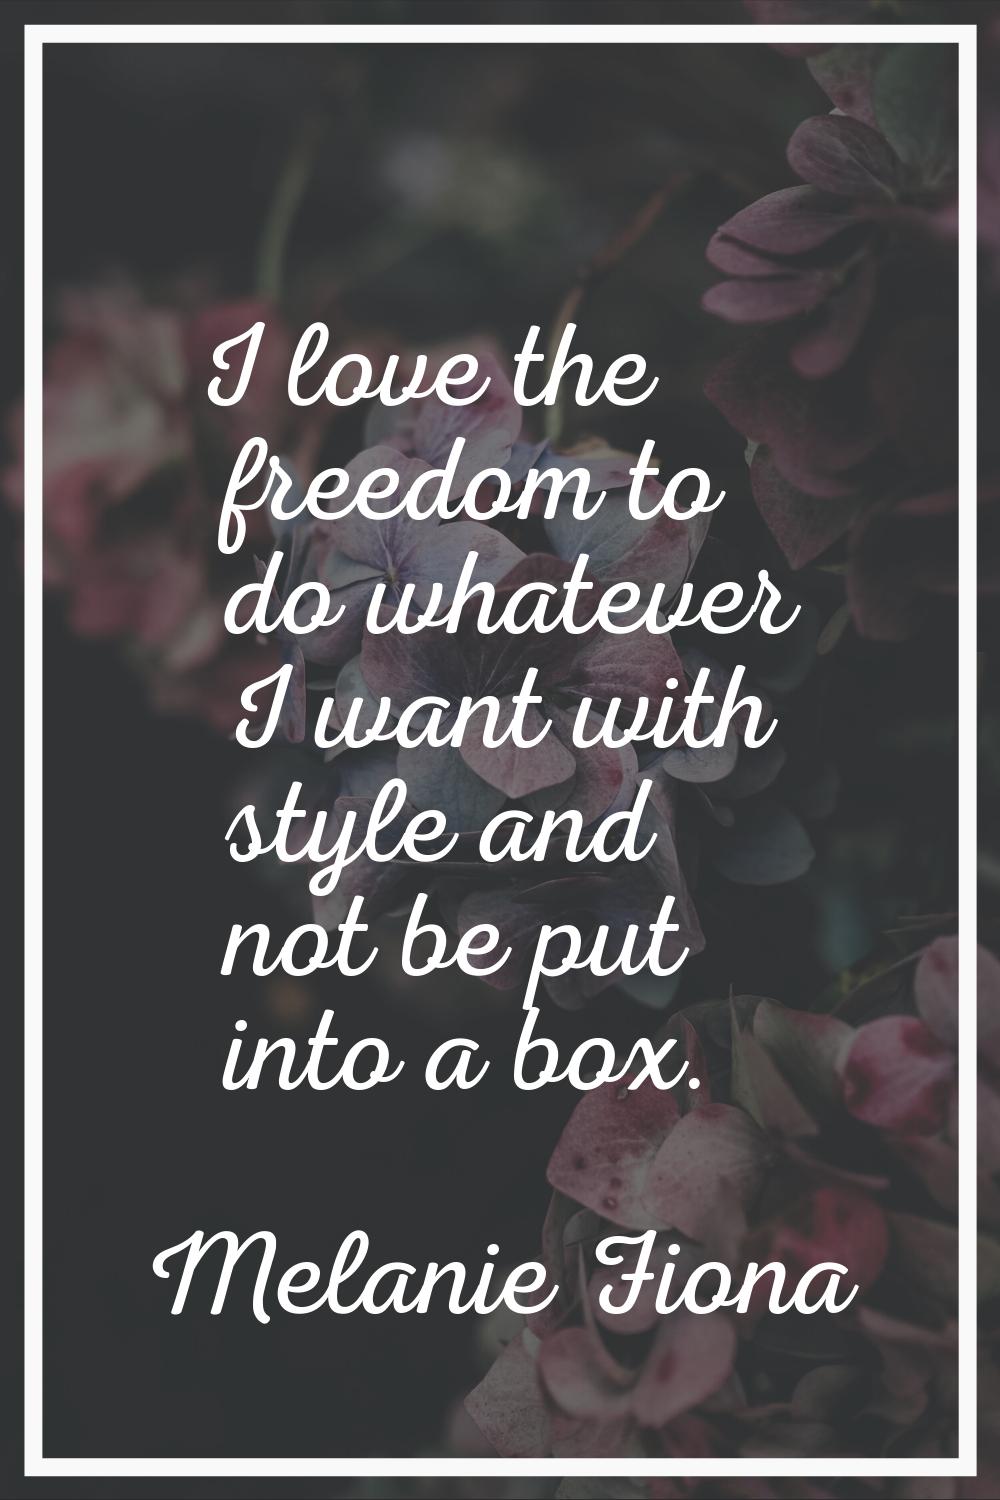 I love the freedom to do whatever I want with style and not be put into a box.